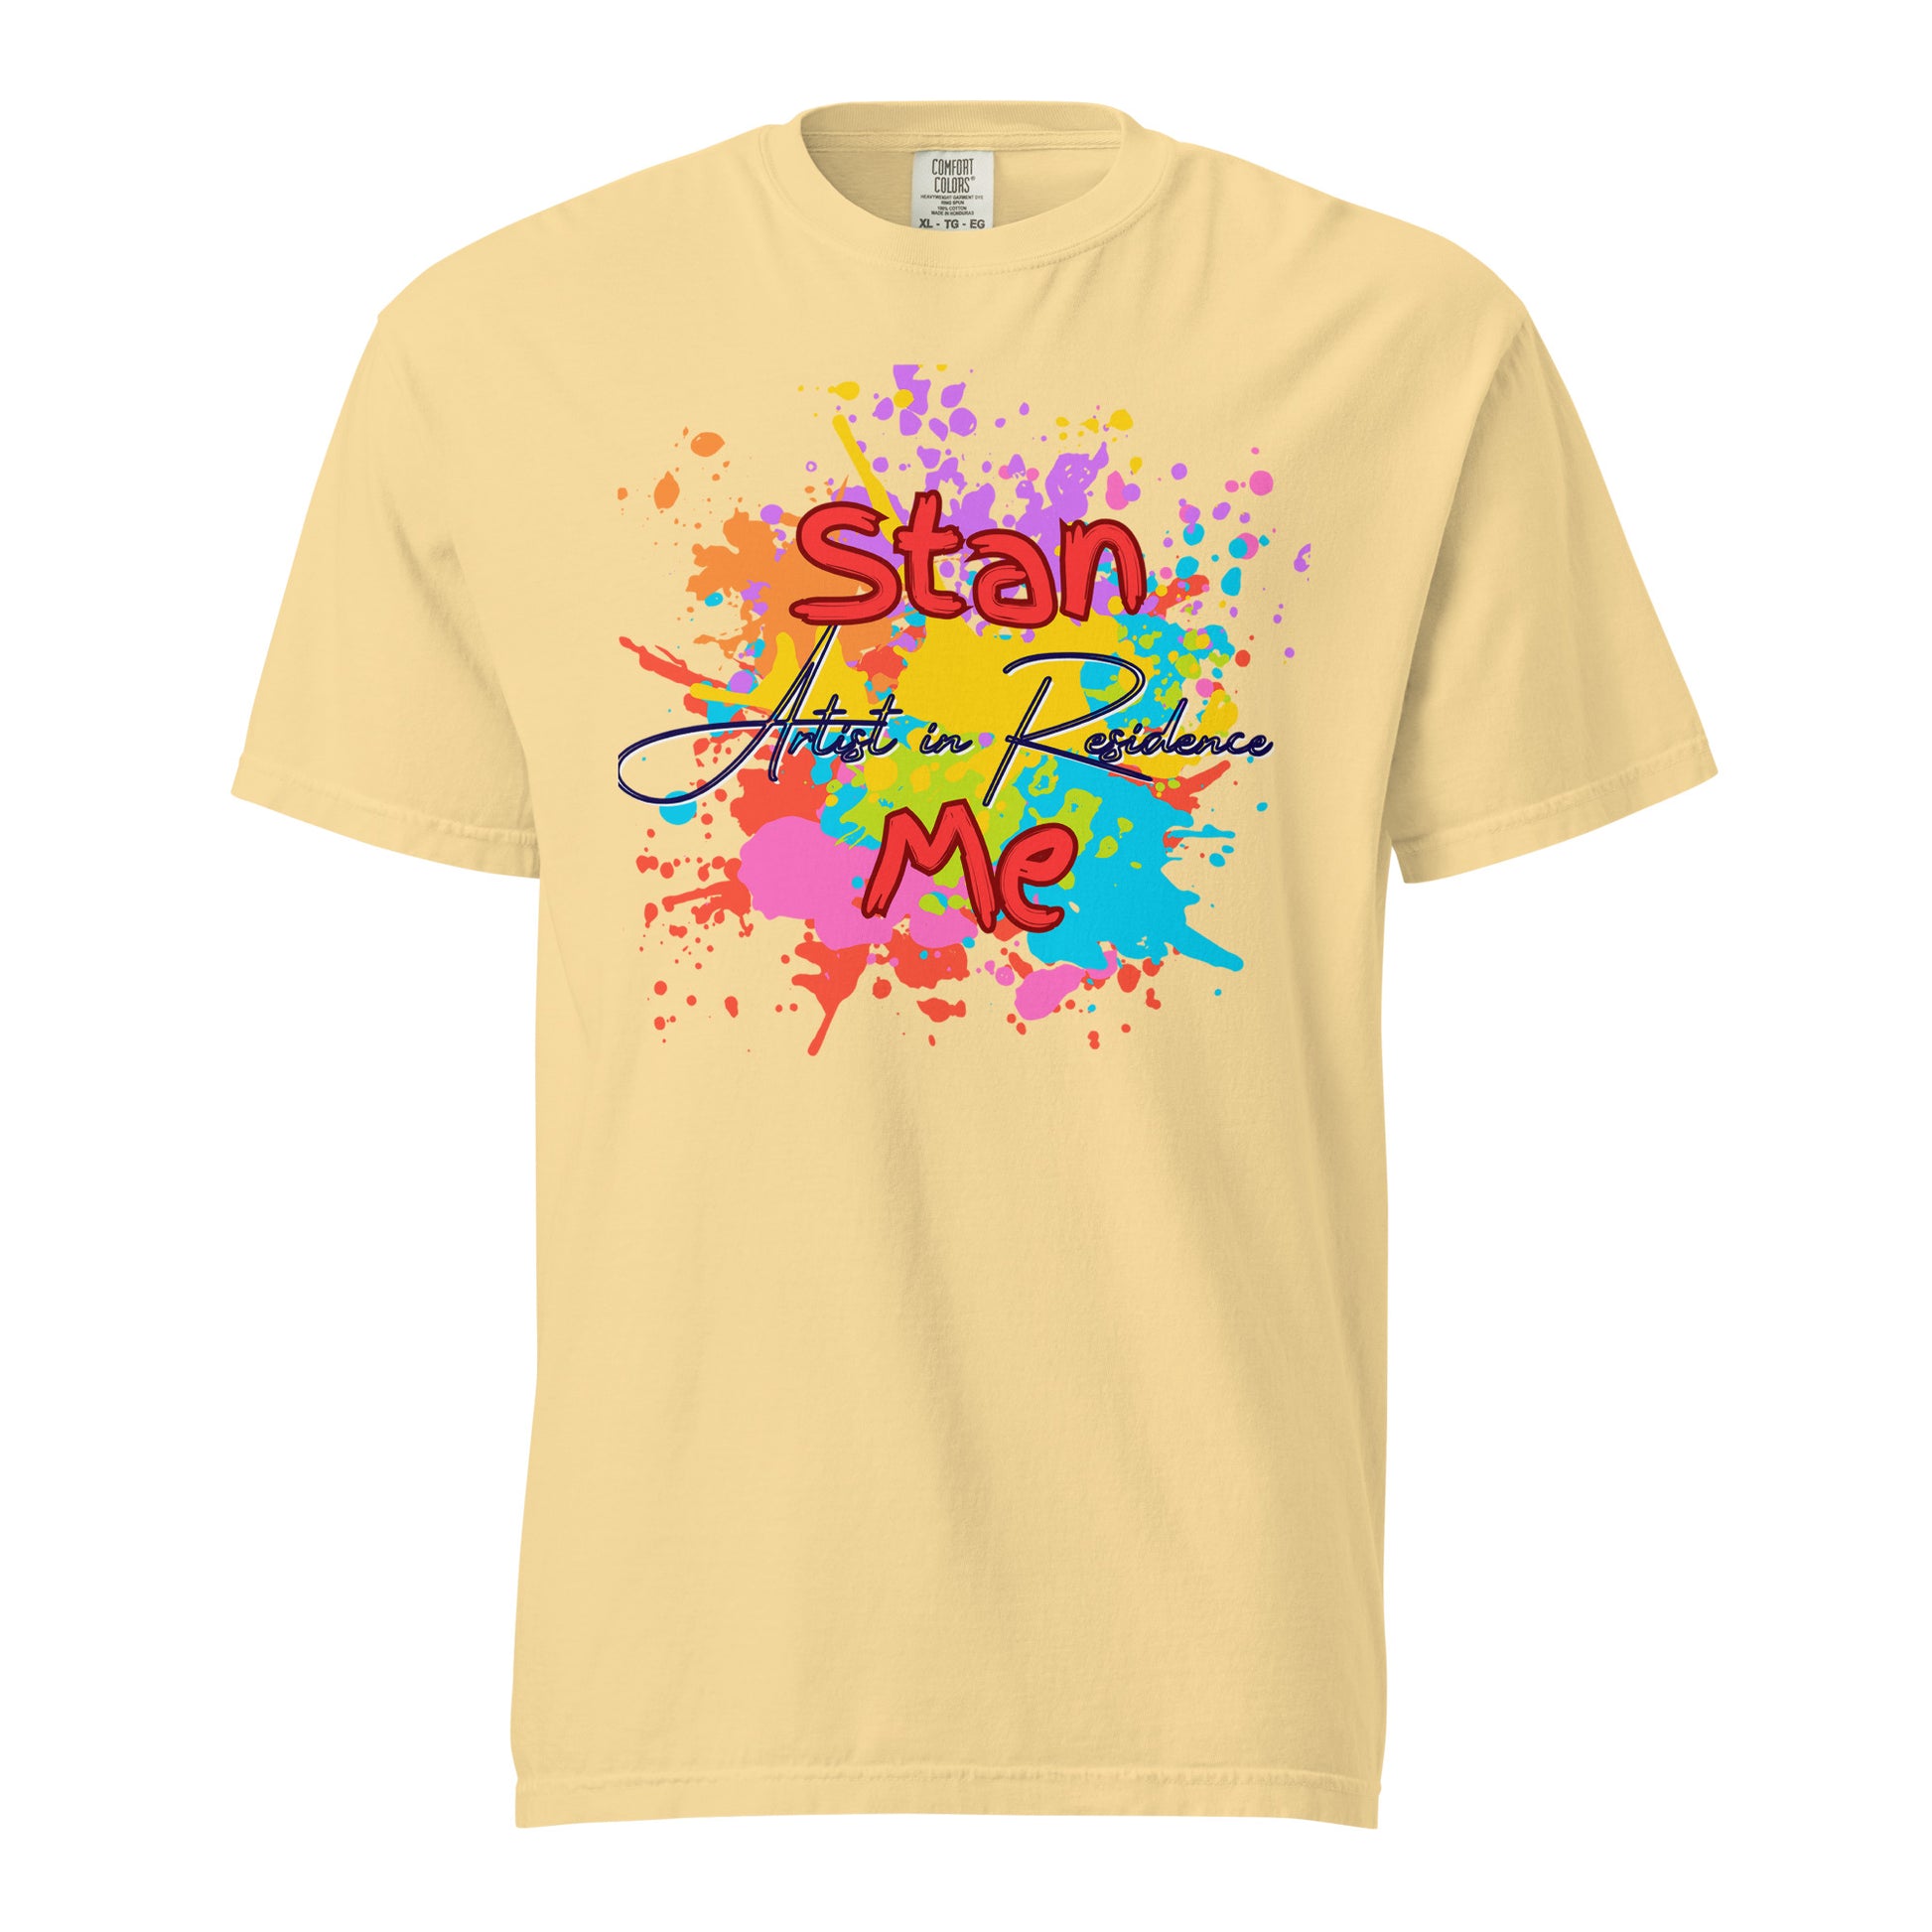 “Stan Me, Artist in Residence” tees featuring paint splatter designs, blending artistic creativity with stan culture. Available in 8 unique styles. Perfect for artists looking to attract fans and gigs. yellow tee